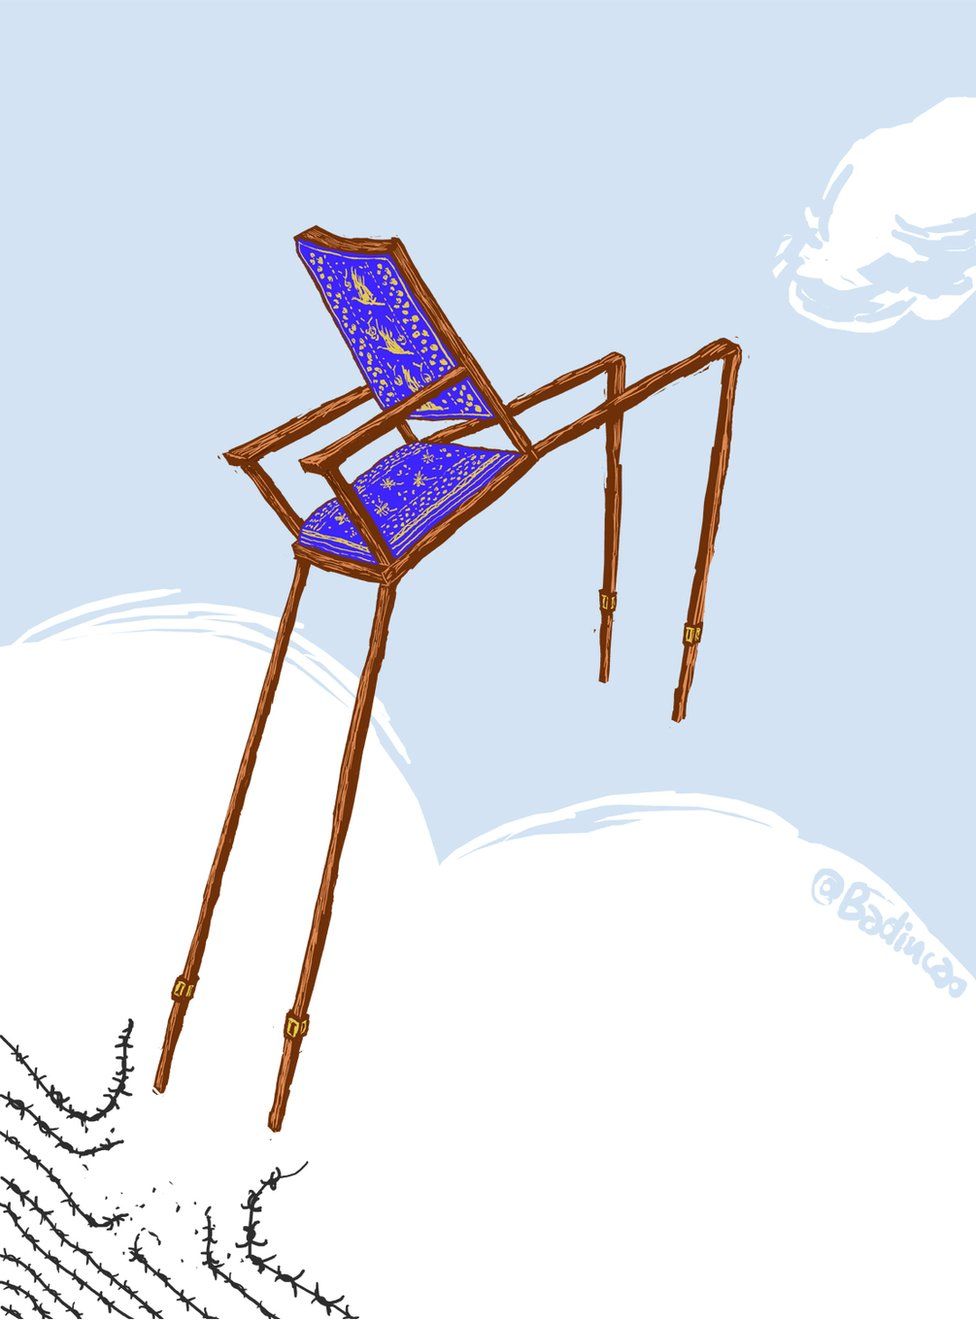 Cartoon depicting Liu Xiaobo's empty chair at the Nobel Peace Prize ceremony in 2010